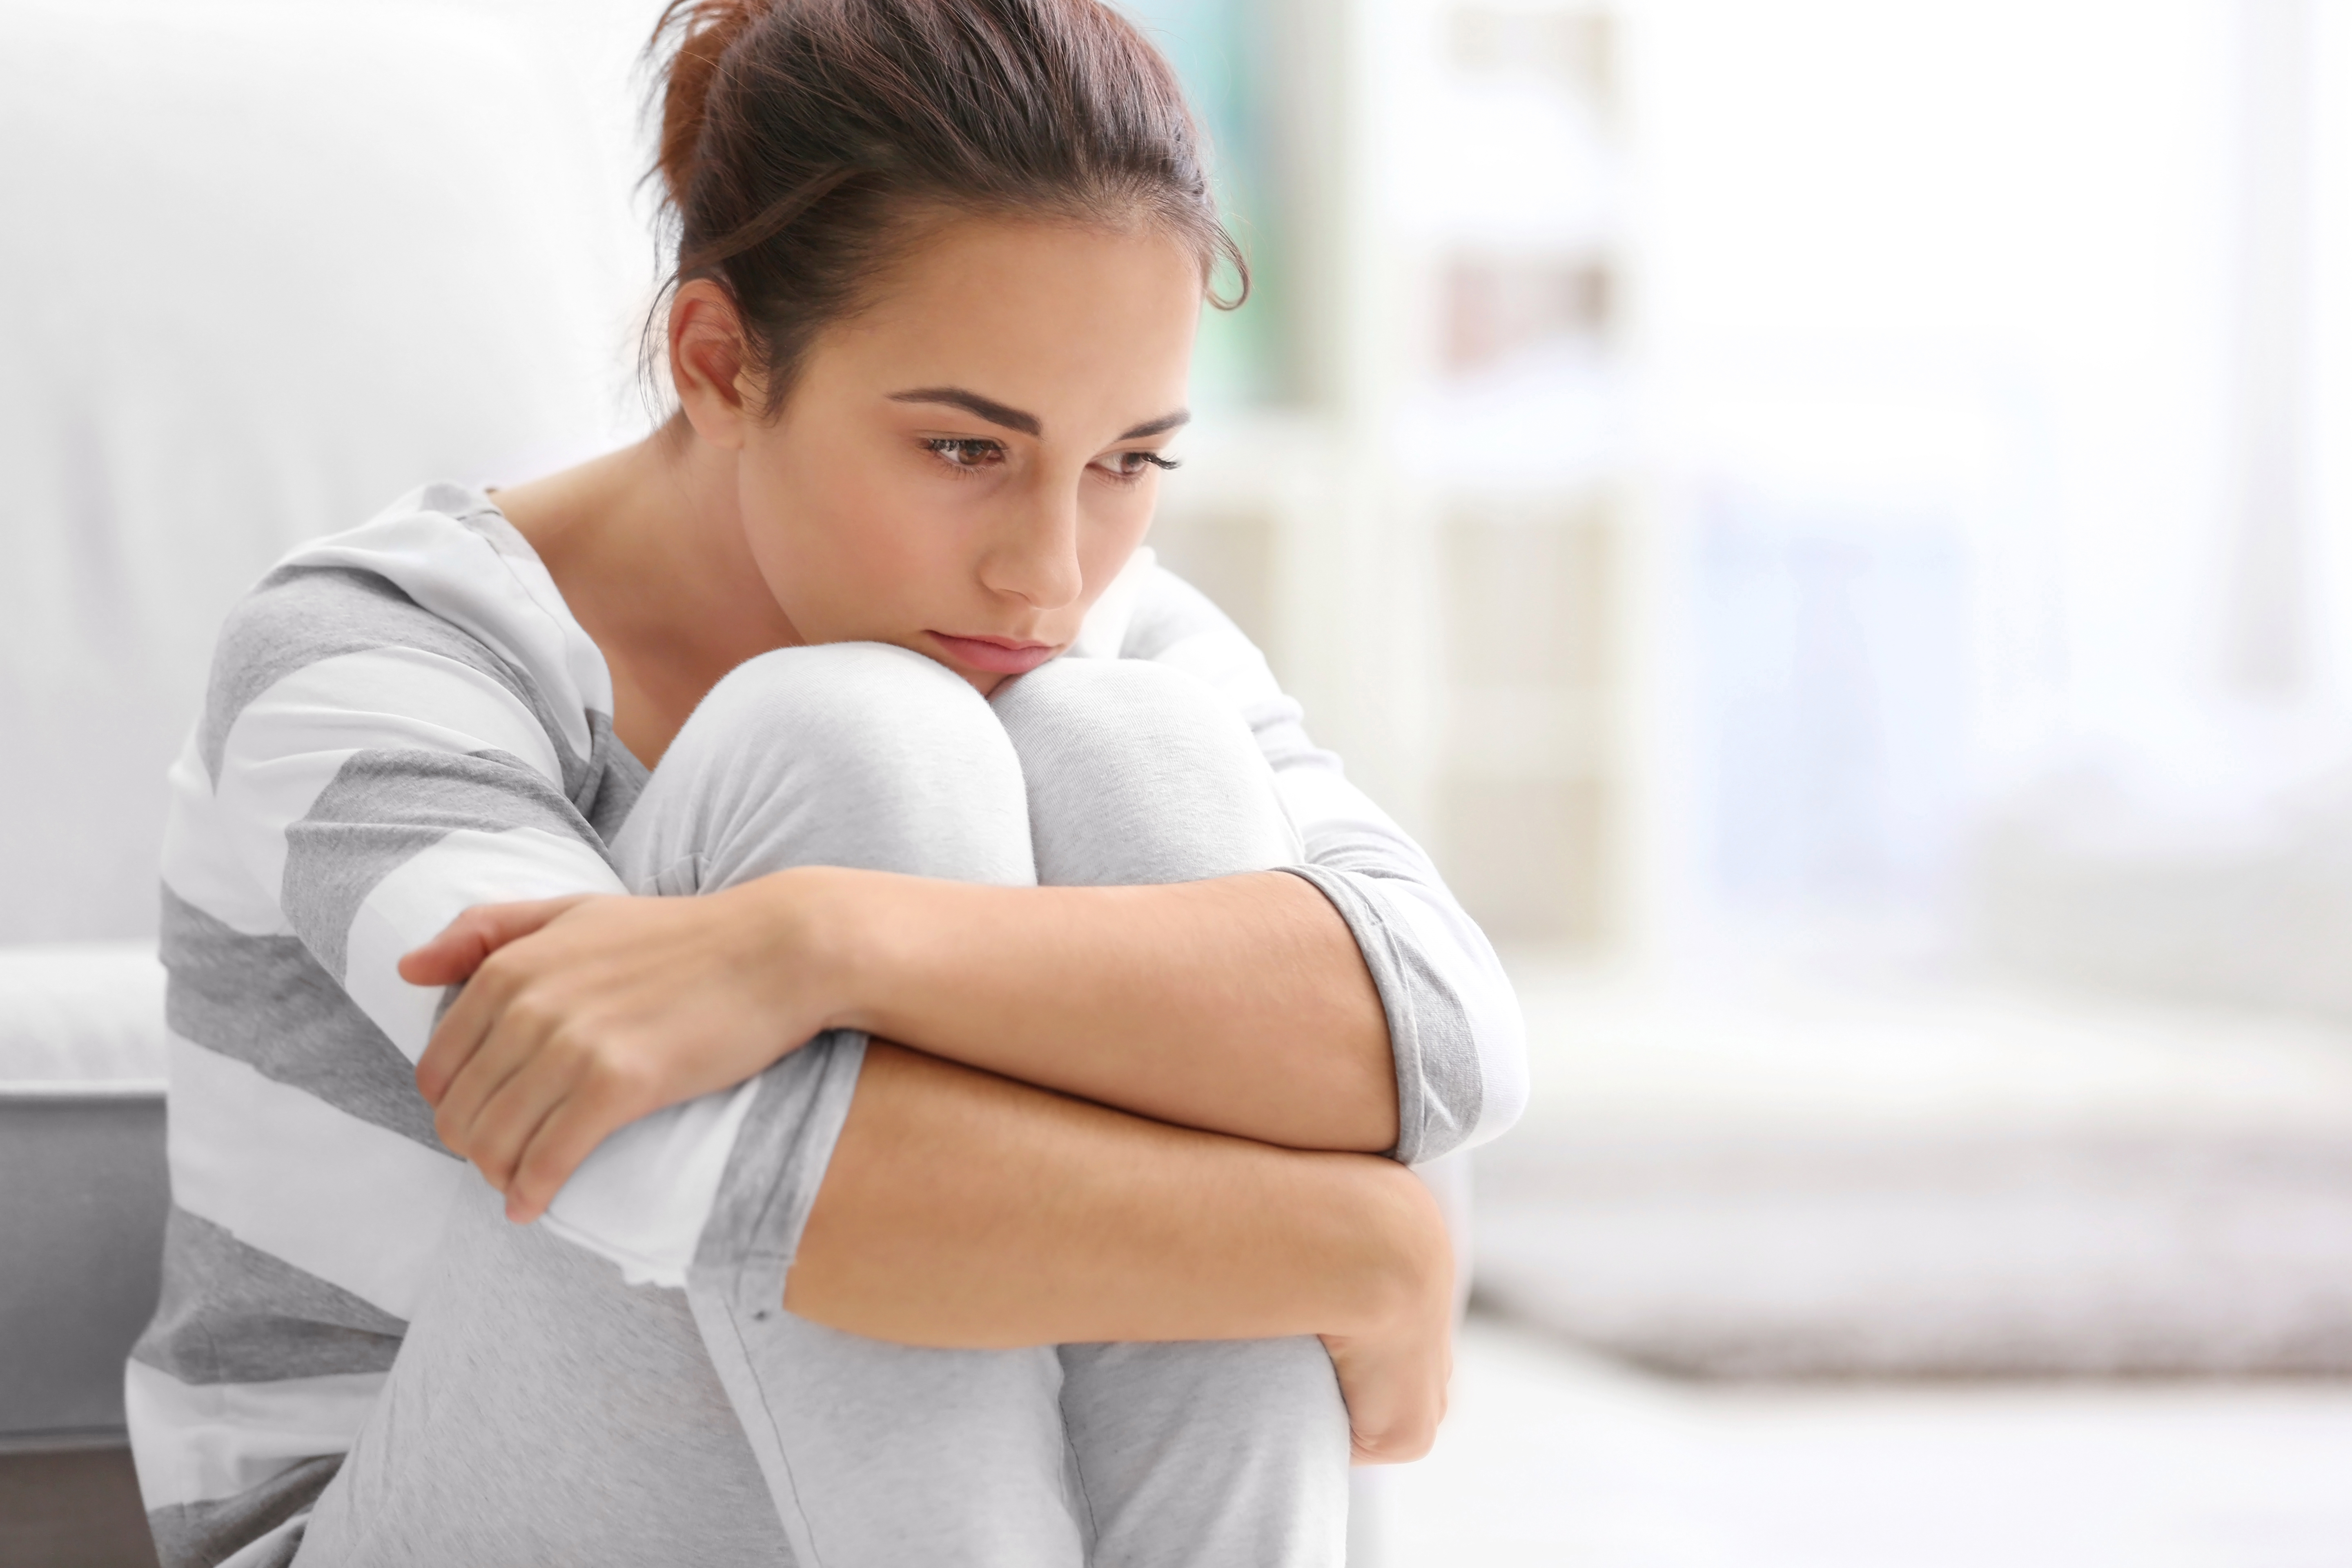 A woman hugging her knees in deep thought | Source: Shutterstock